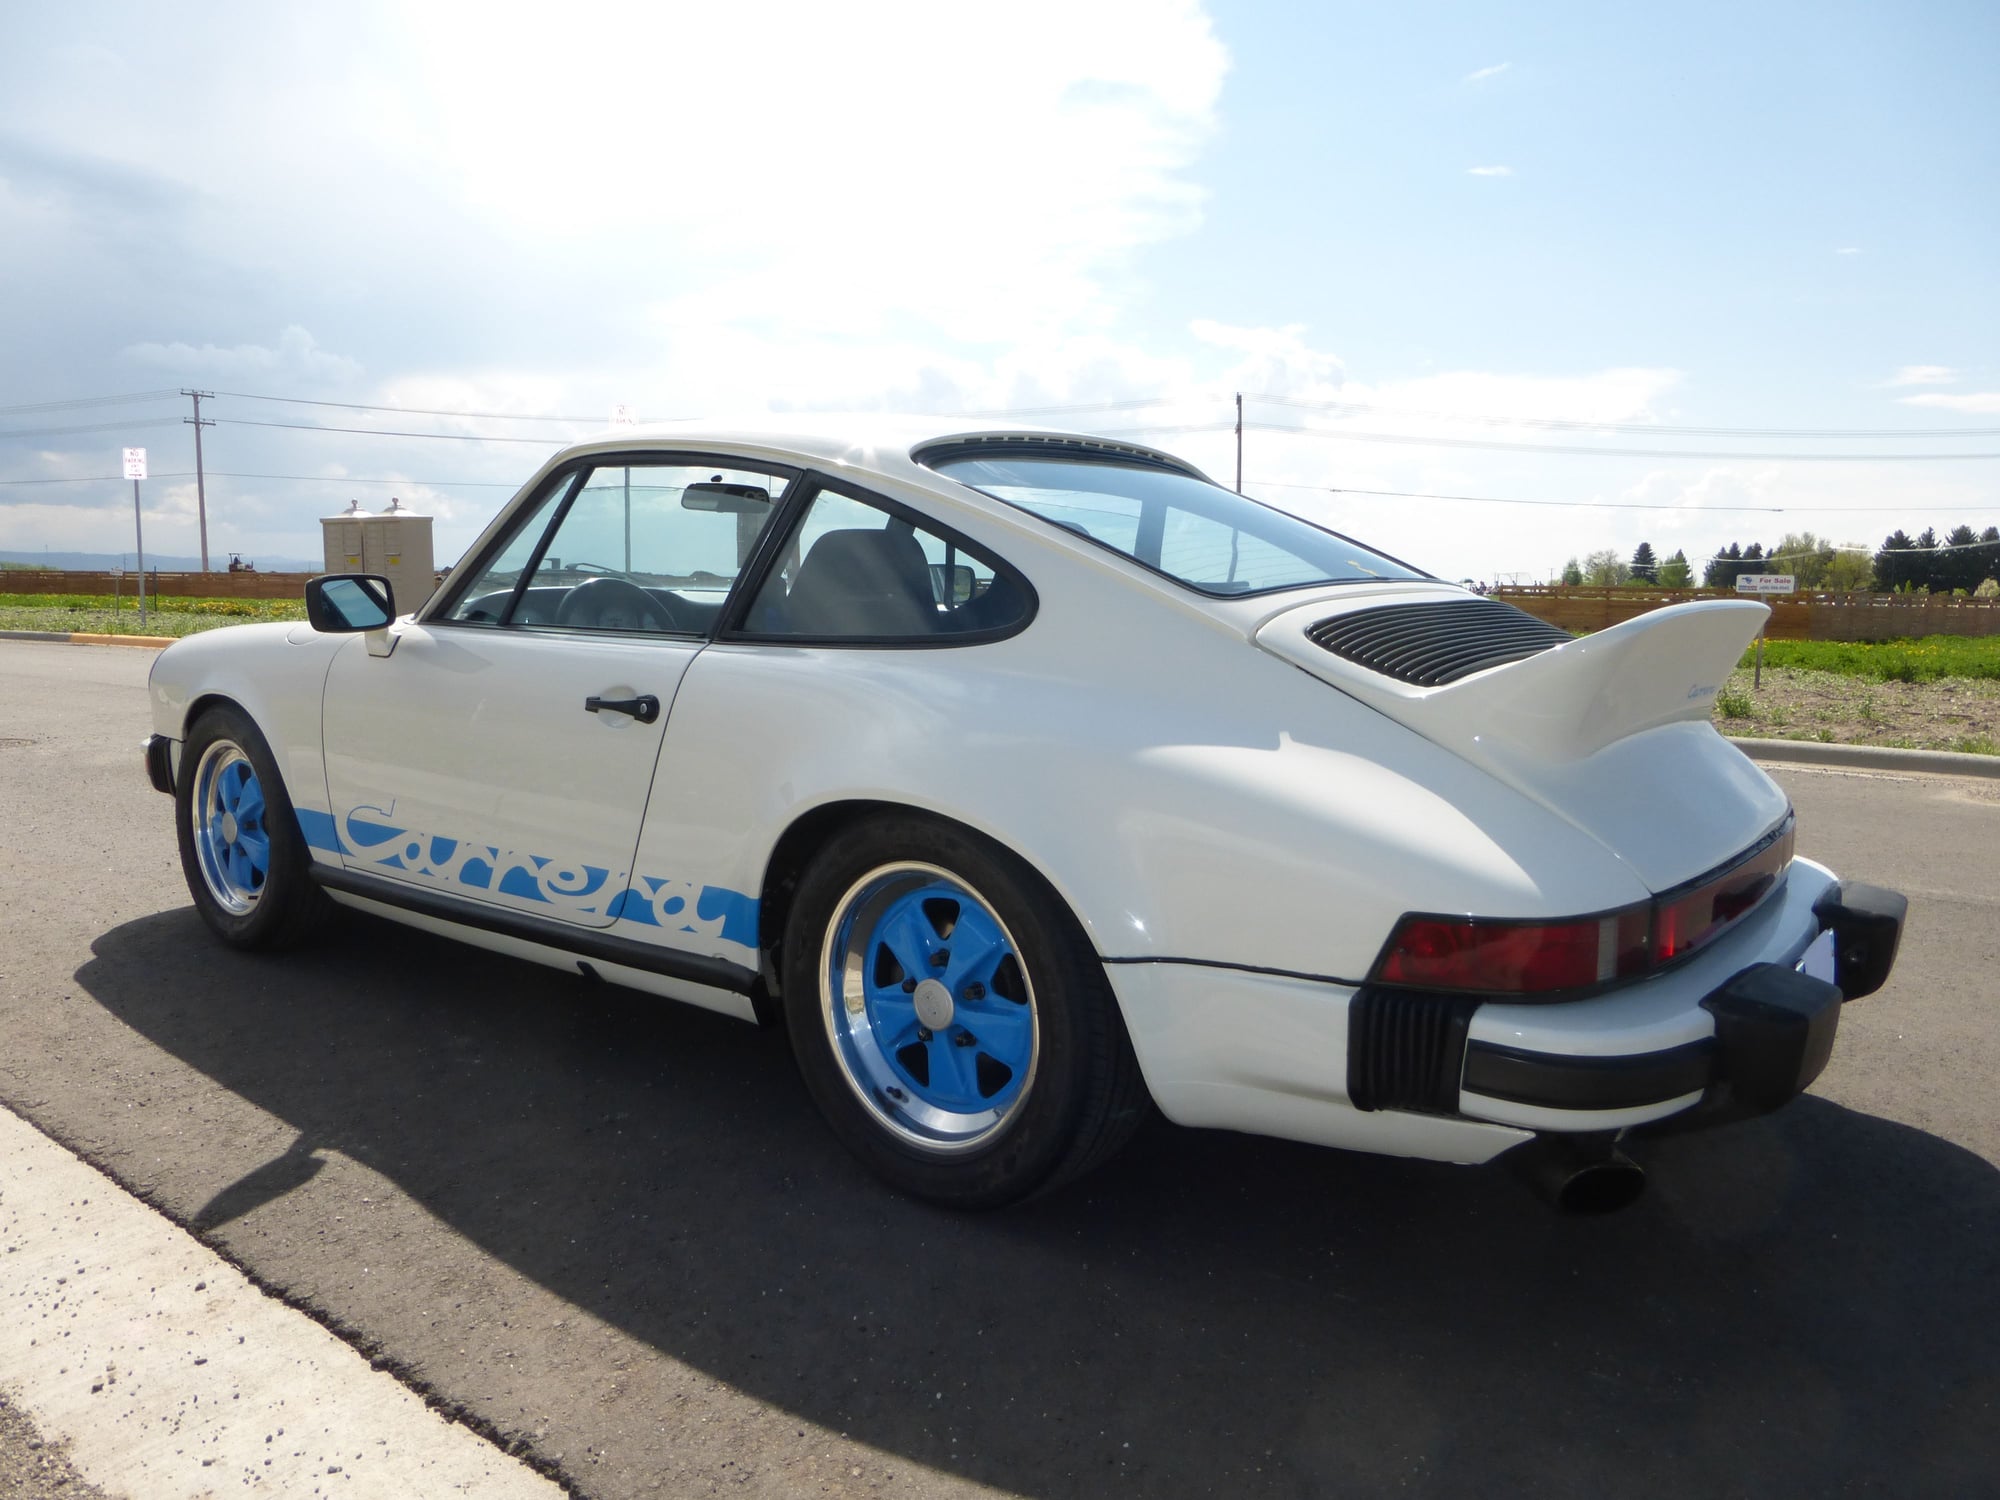 1982 Porsche 911 - 1982 Porsche 911 SC Sunroof Coupe - Used - VIN WP0AA0919CS121714 - 6 cyl - 2WD - Manual - Coupe - White - Bozeman, MT 59718, United States